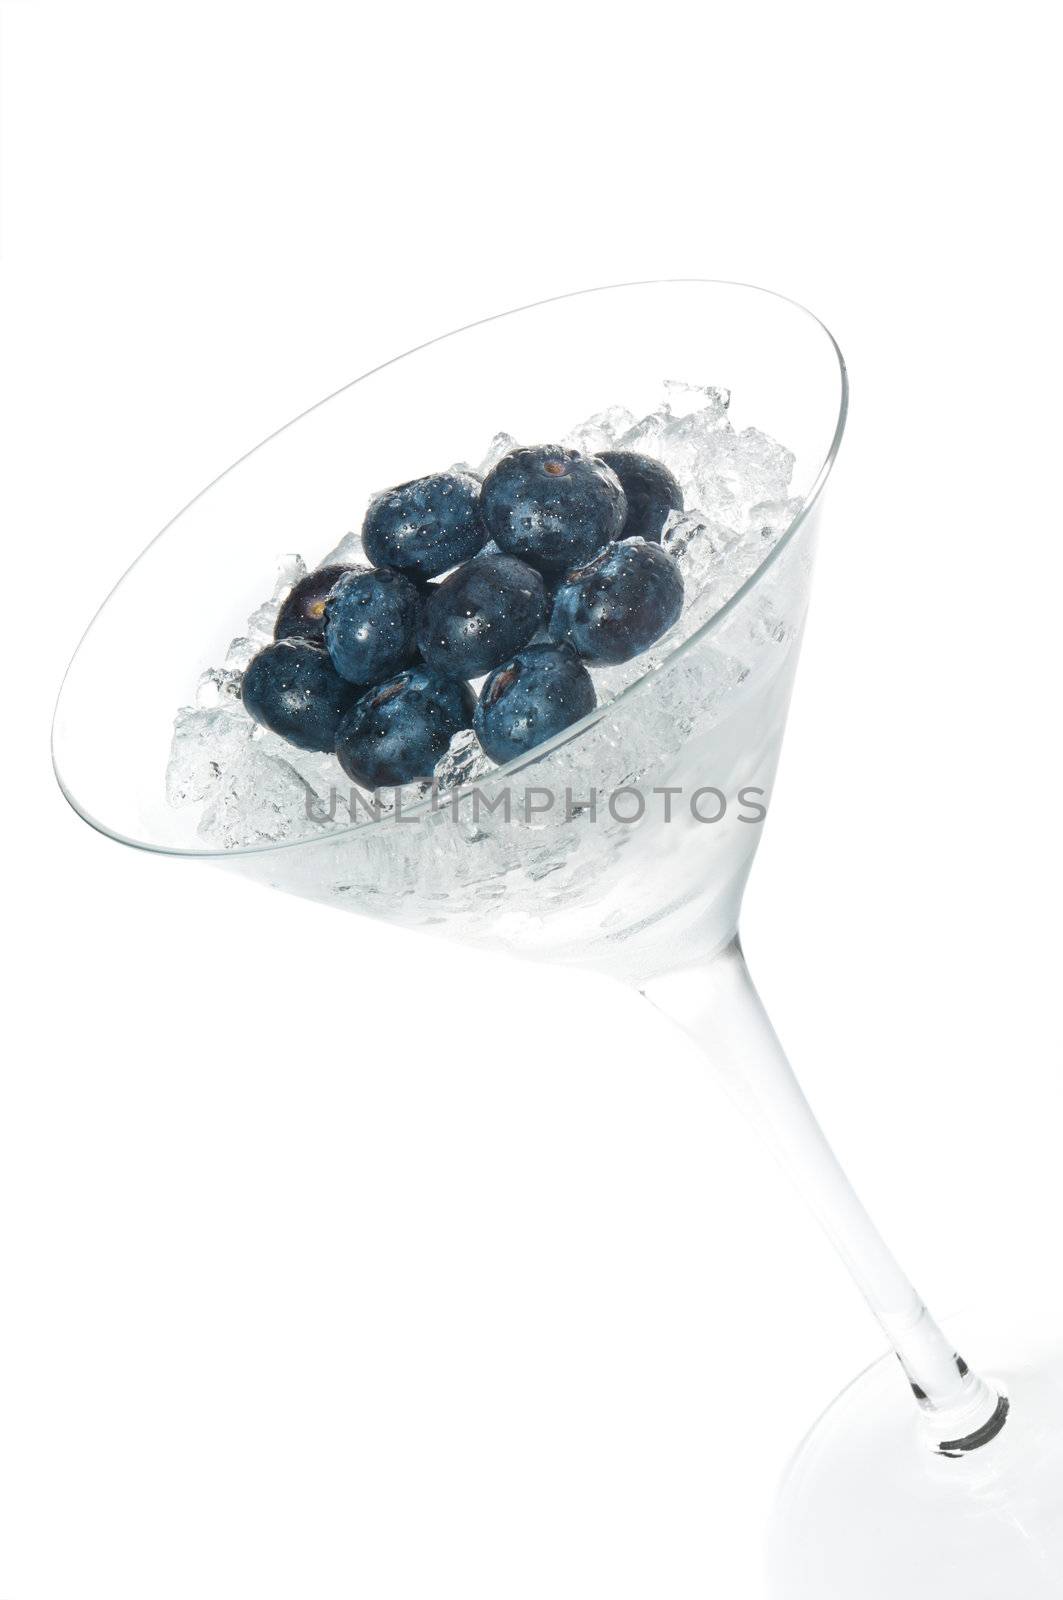 Blueberry cocktail in a martini glass over white